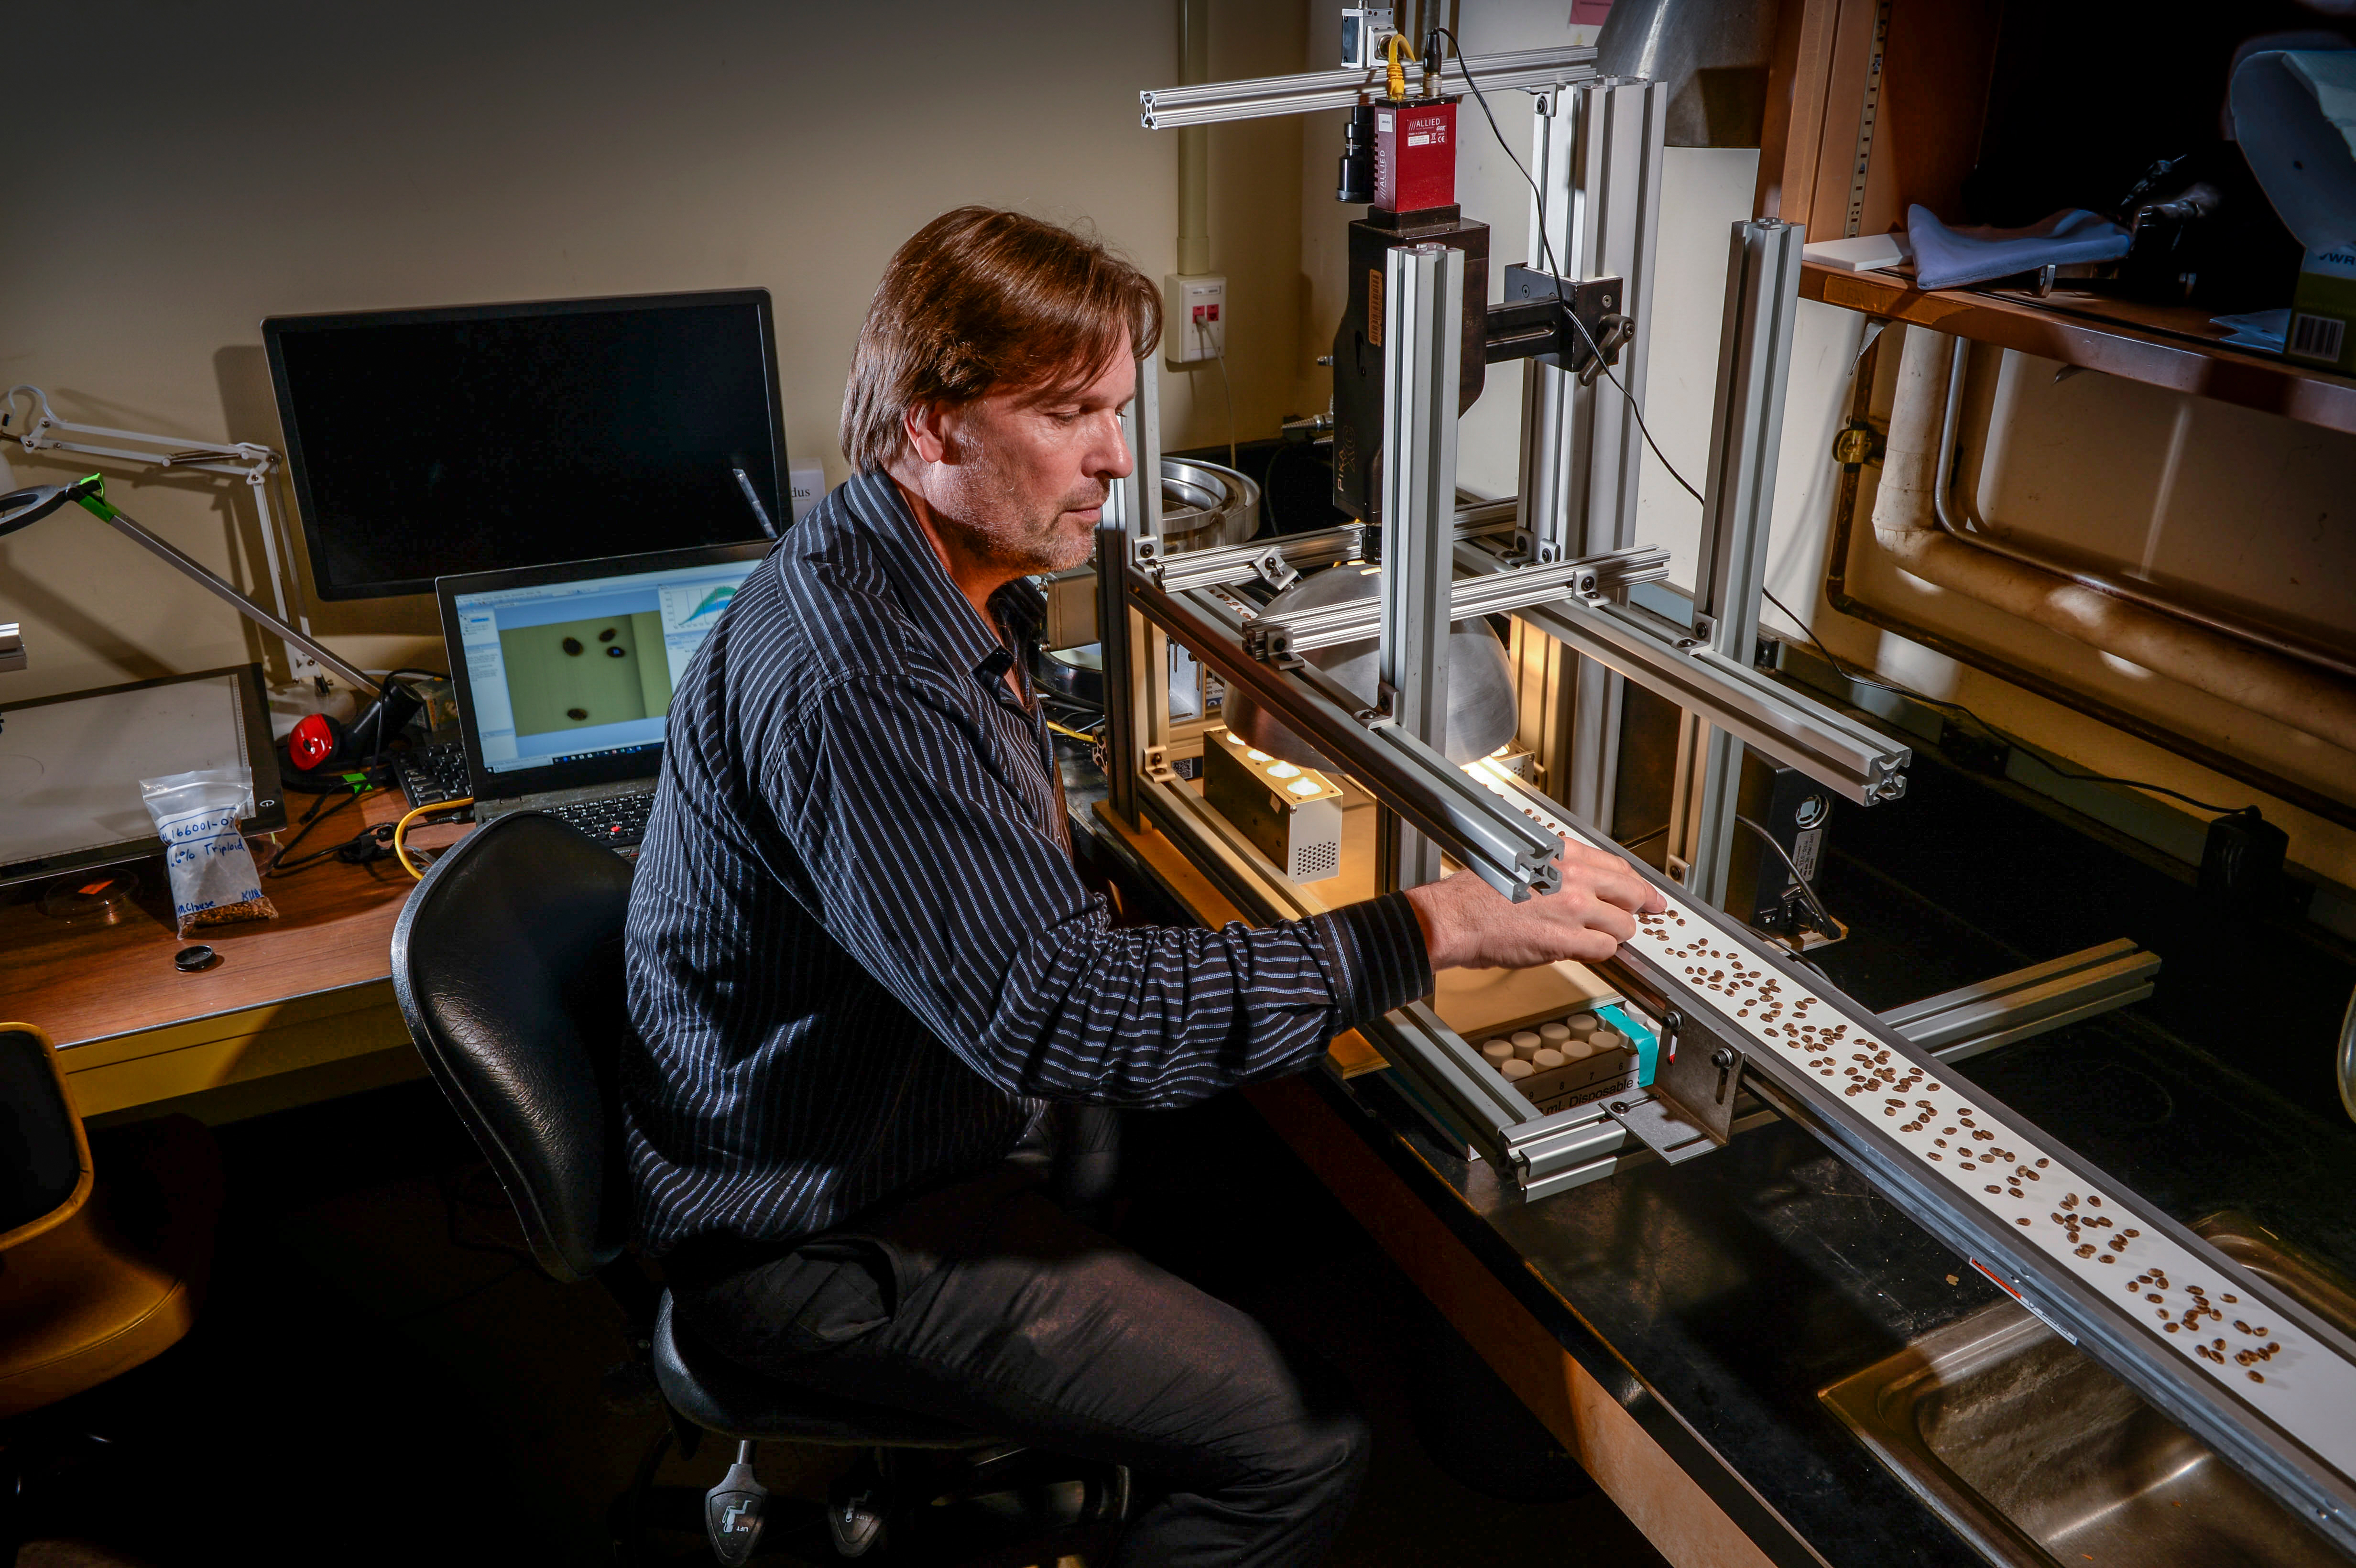 Christian Nansen, an associate professor in the UC Davis Department of Entomology and Nematology, has launched a startup, Spectral Analytix, that utilizes machine vision, robotics and machine learning to sort or classify seeds. (Hector Amezcua/UC Davis)